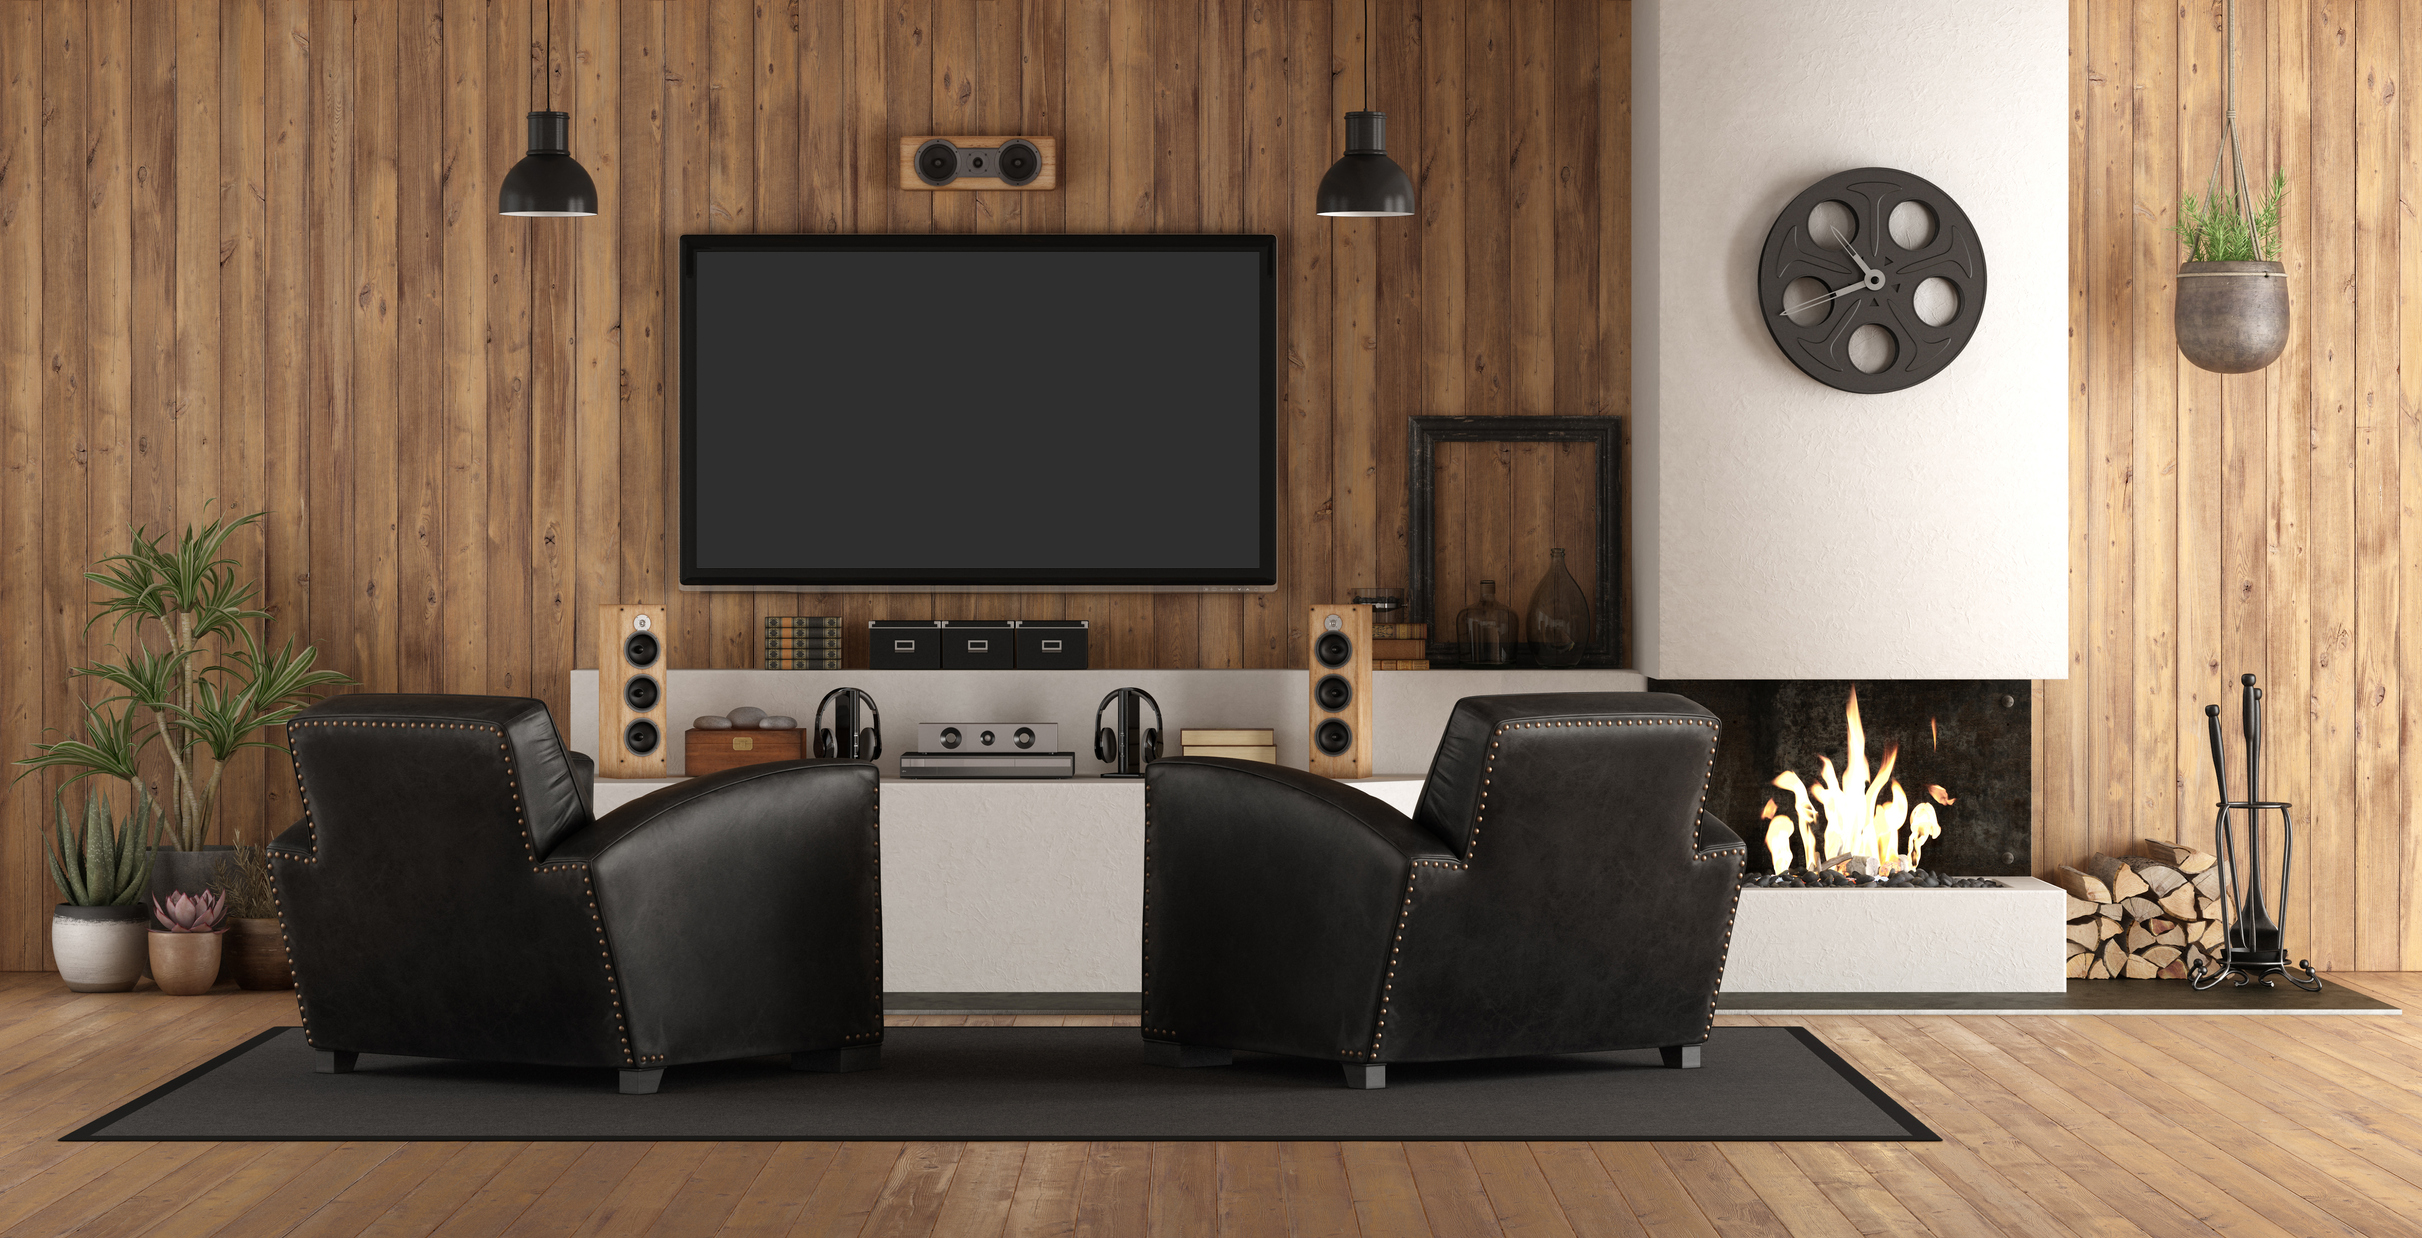 Home cinema in rustic style